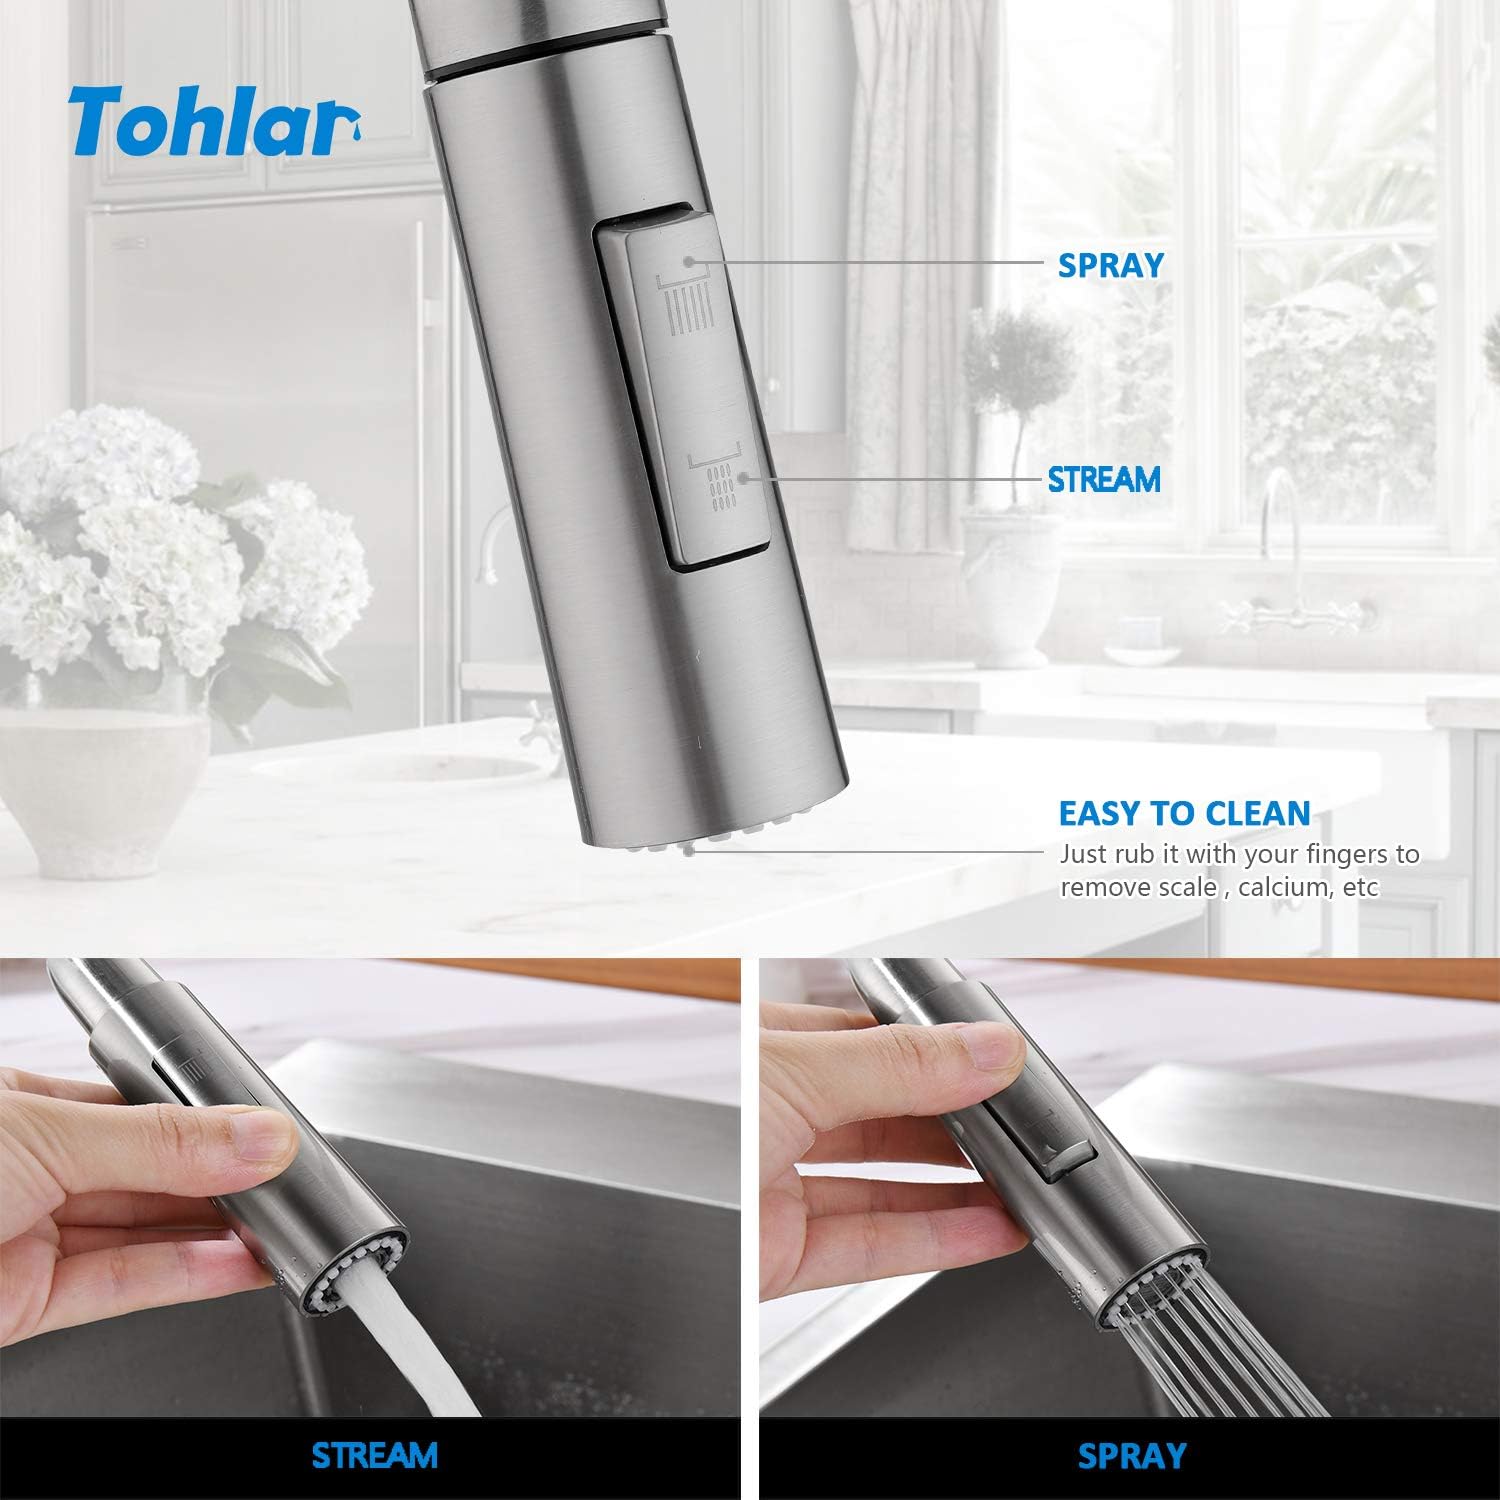 Tohlar Kitchen Sink Faucets with Pull-Down Sprayer, Modern Stainless Steel Single Handle Pull Down Sprayer Faucet with Deck Plate (Bru